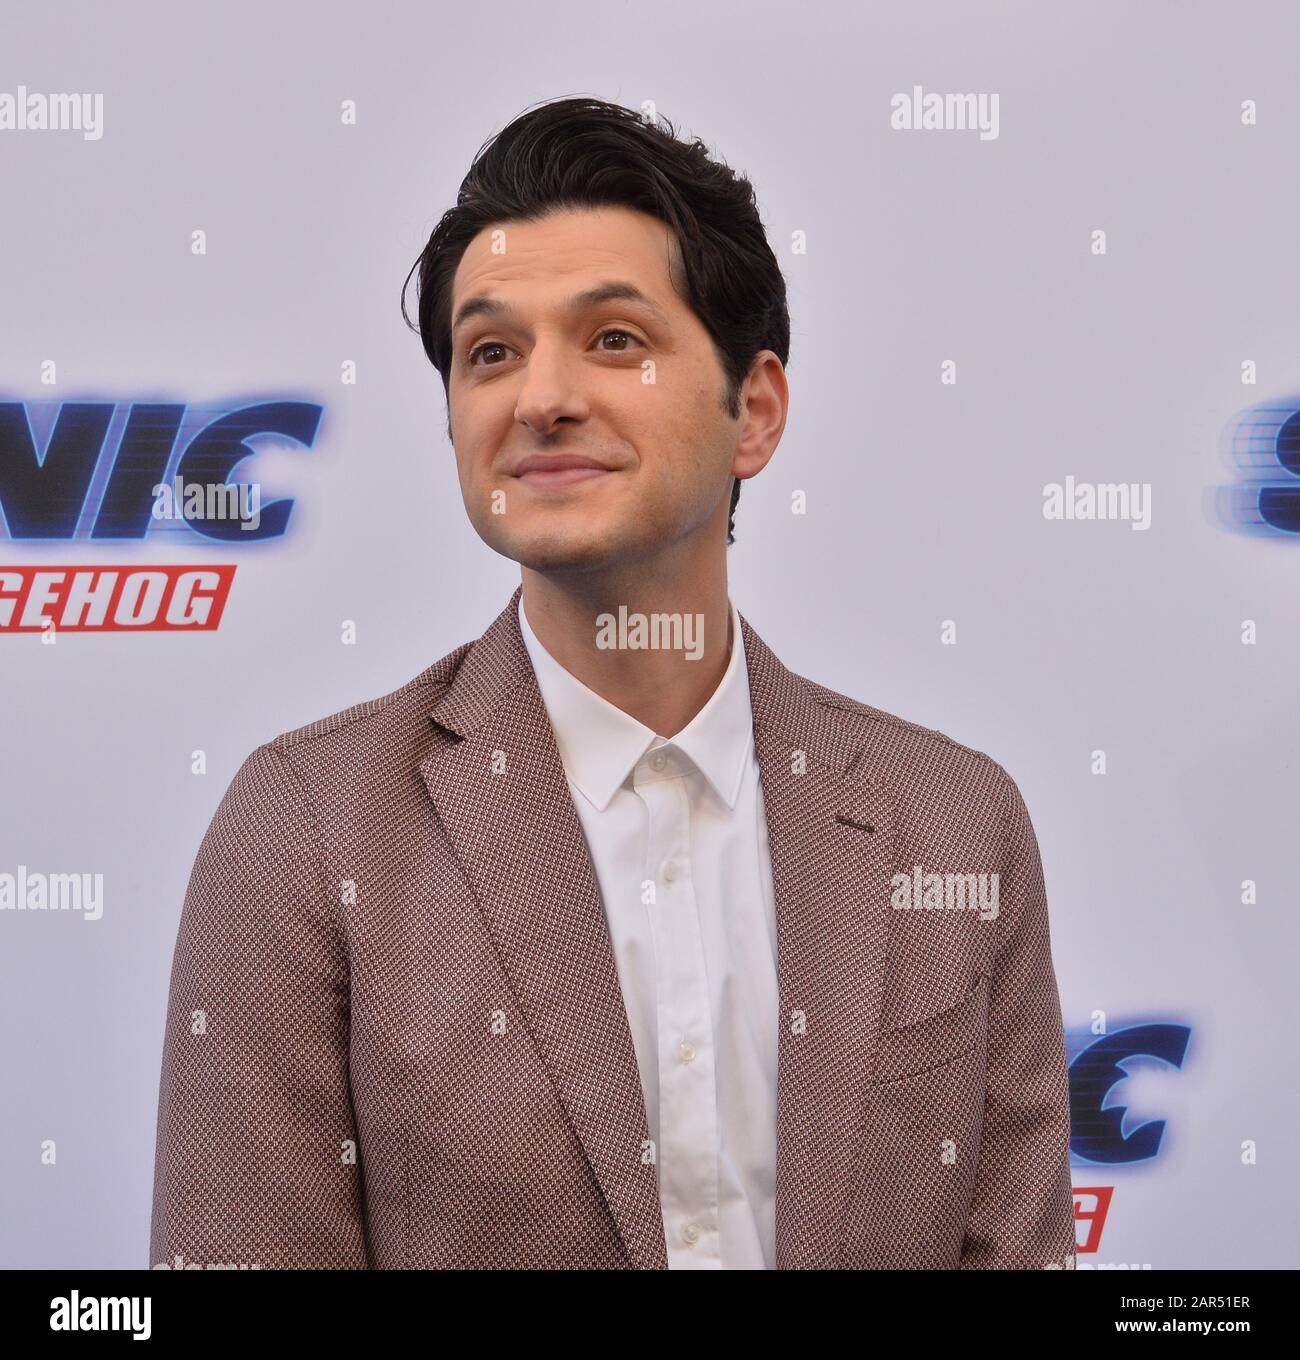 Cast member Ben Schwartz attends the 'Sonic the Hedgehog' family day event on the Paramount Pictures lot in Los Angeles on Saturday, January 25, 2020. Storyline: Based on the global blockbuster videogame franchise from Sega, 'Sonic the Hedgehog' tells the story of the world's speediest hedgehog as he embraces his new home on Earth. Photo by Jim Ruymen/UPI Credit: UPI/Alamy Live News Stock Photo